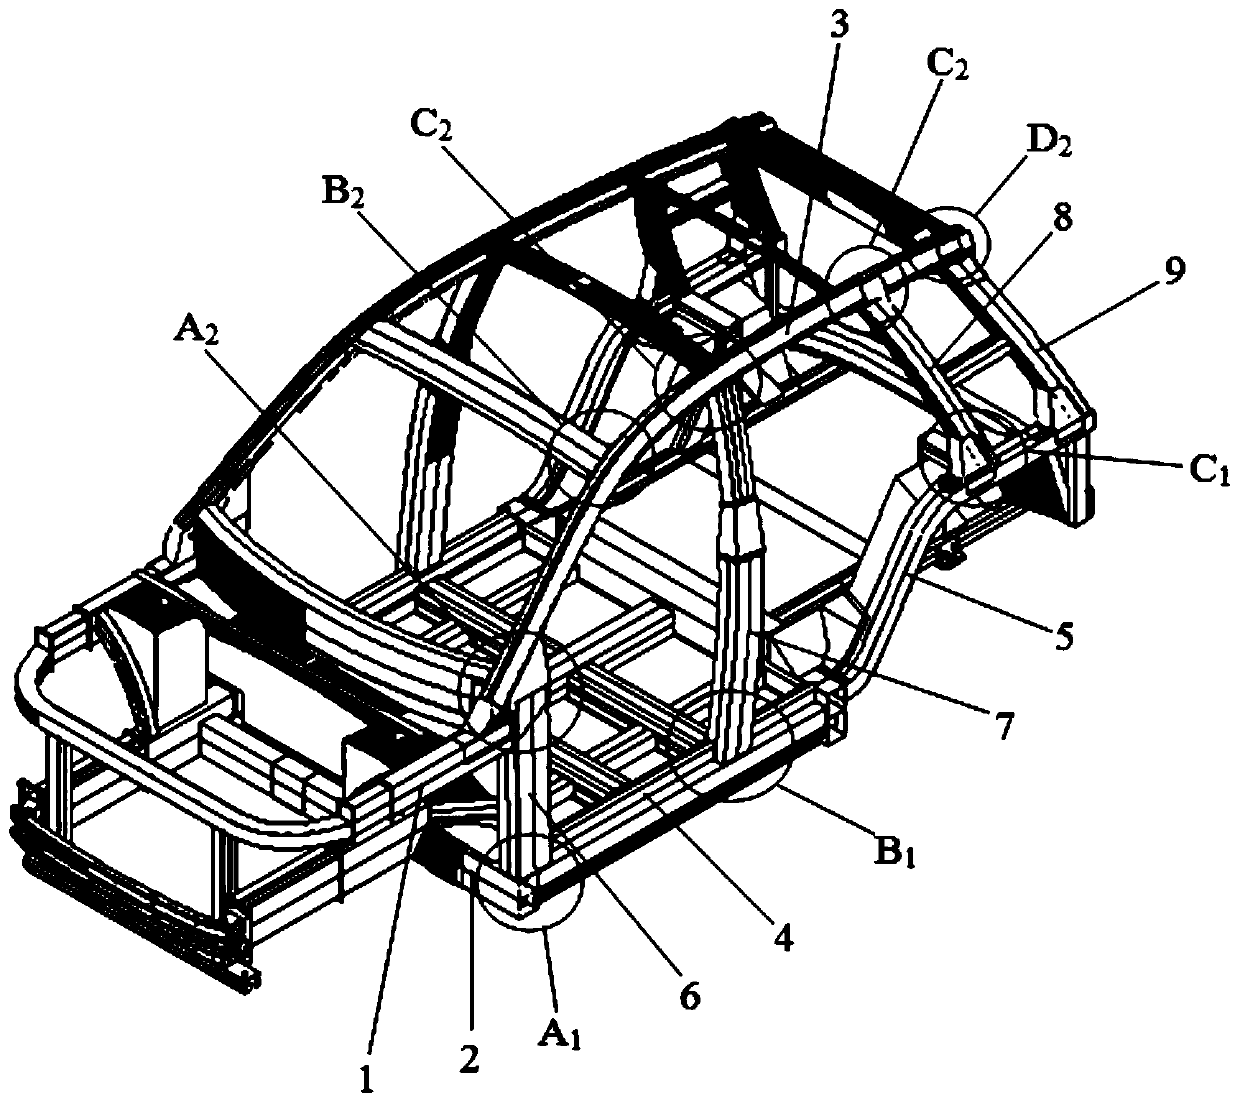 Analysis method for improving modality and rigidity performance of an aluminum vehicle body based on a vehicle body joint